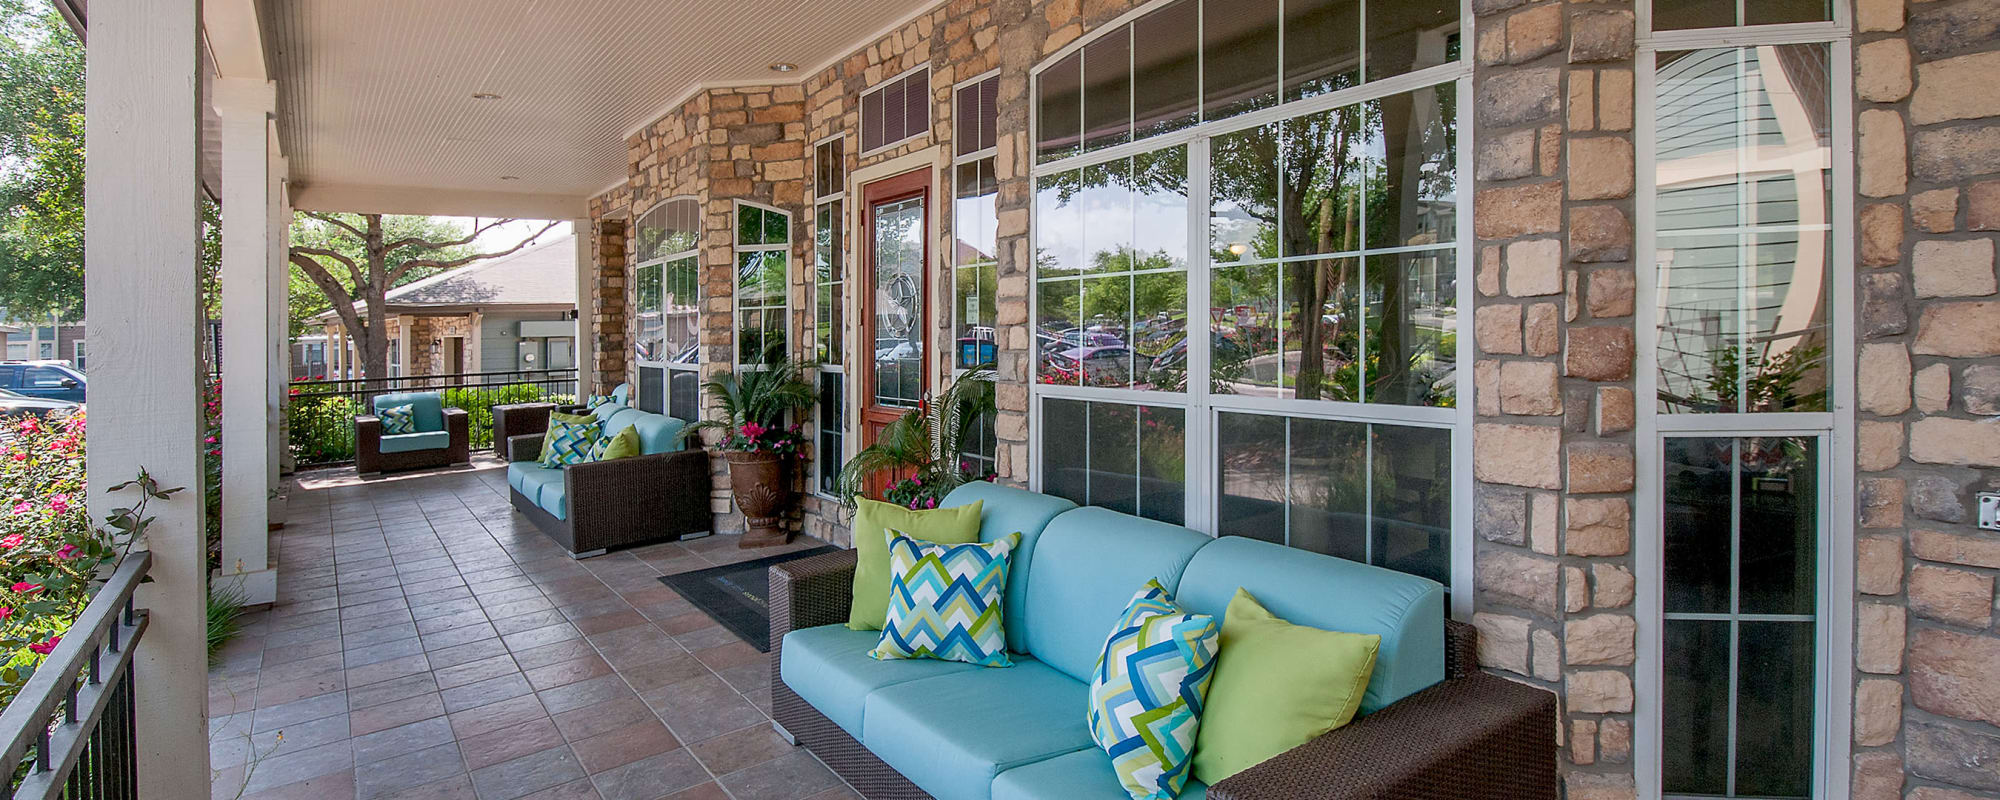 Covered porch at Sunrise Canyon in Universal City, Texas